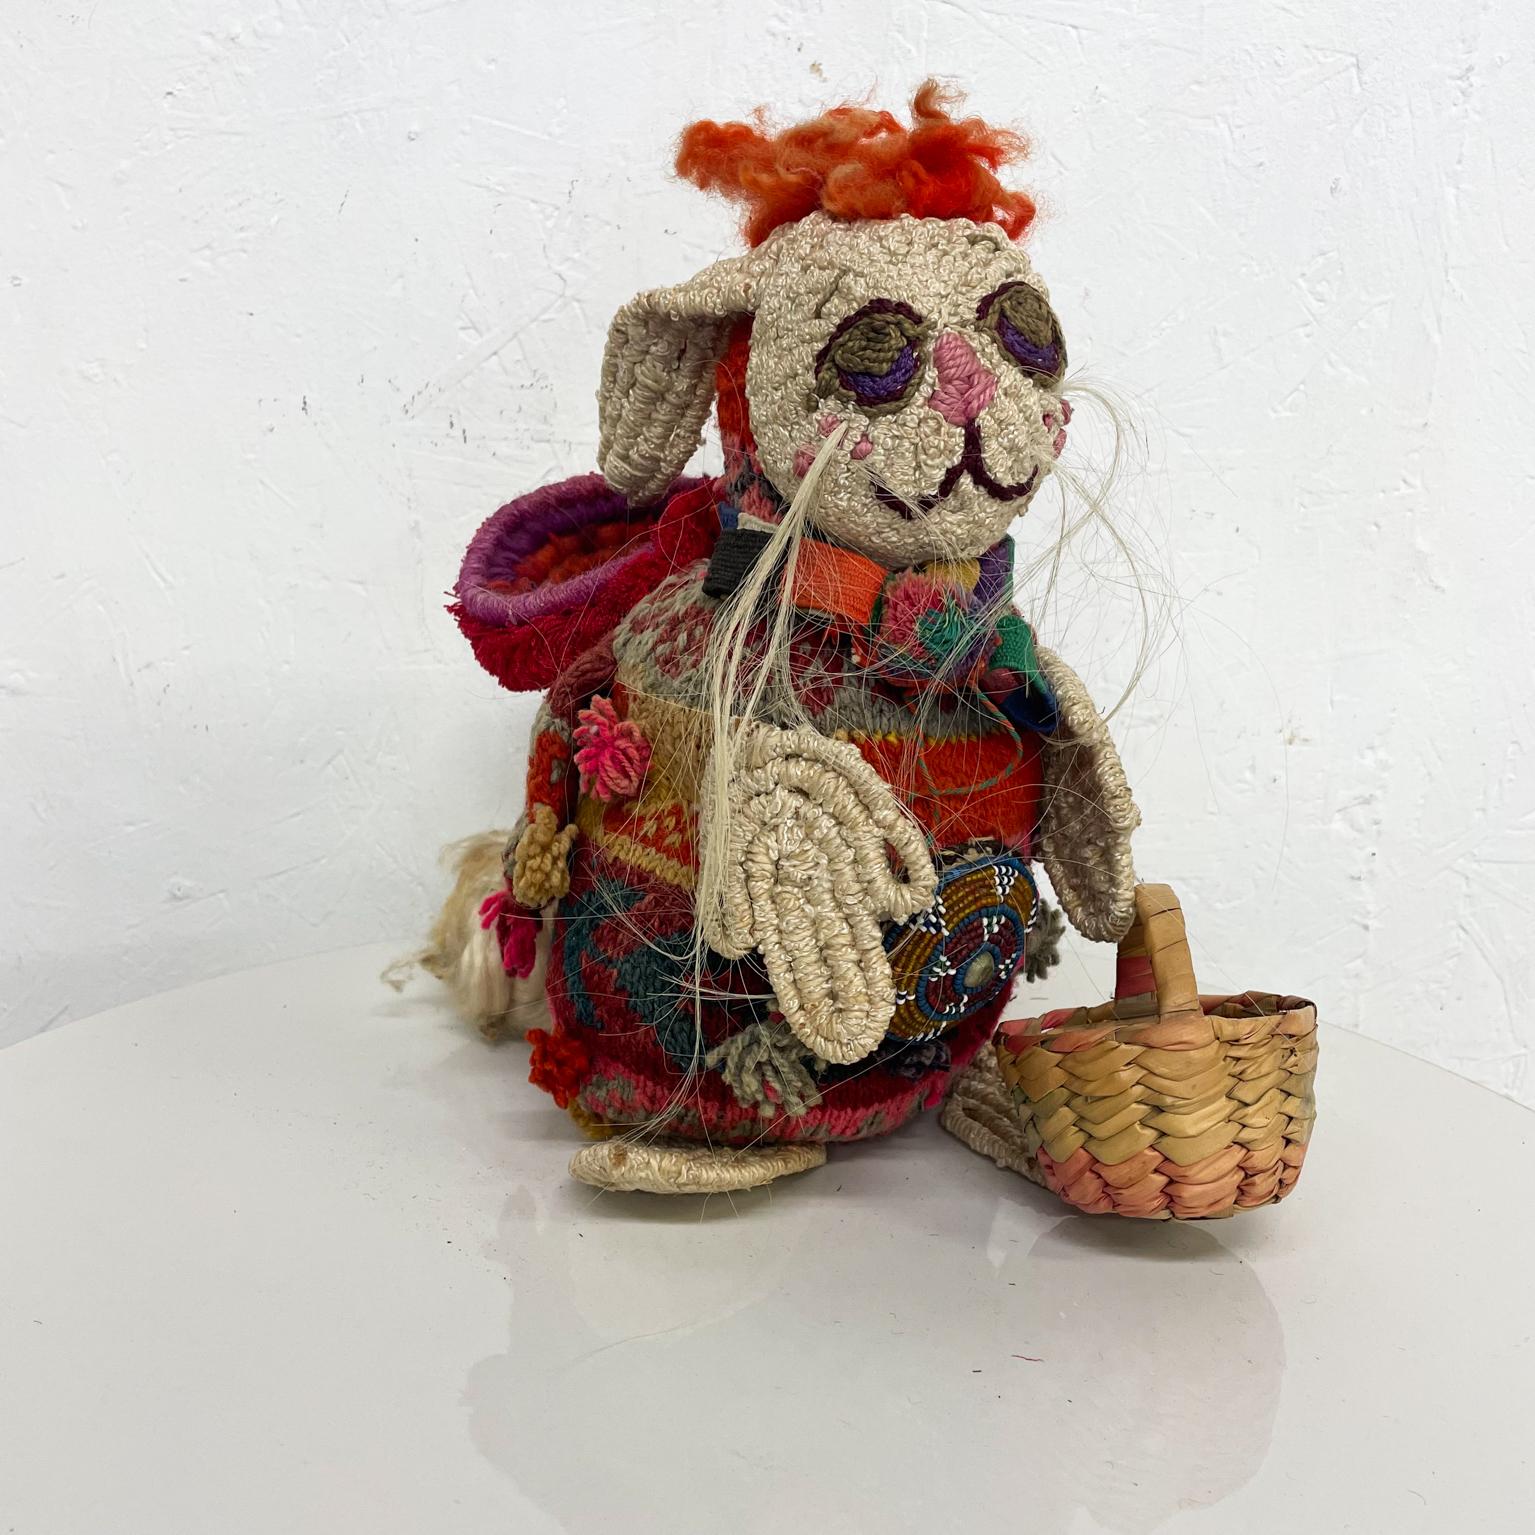 Adorable Vintage Peruvian folk art pink bunny rabbit with basket handmade wool.
Measures: 12 H X 6.25 W X 11.5 D
Unmarked.
Preowned unrestored original vintage condition.
See images provided.